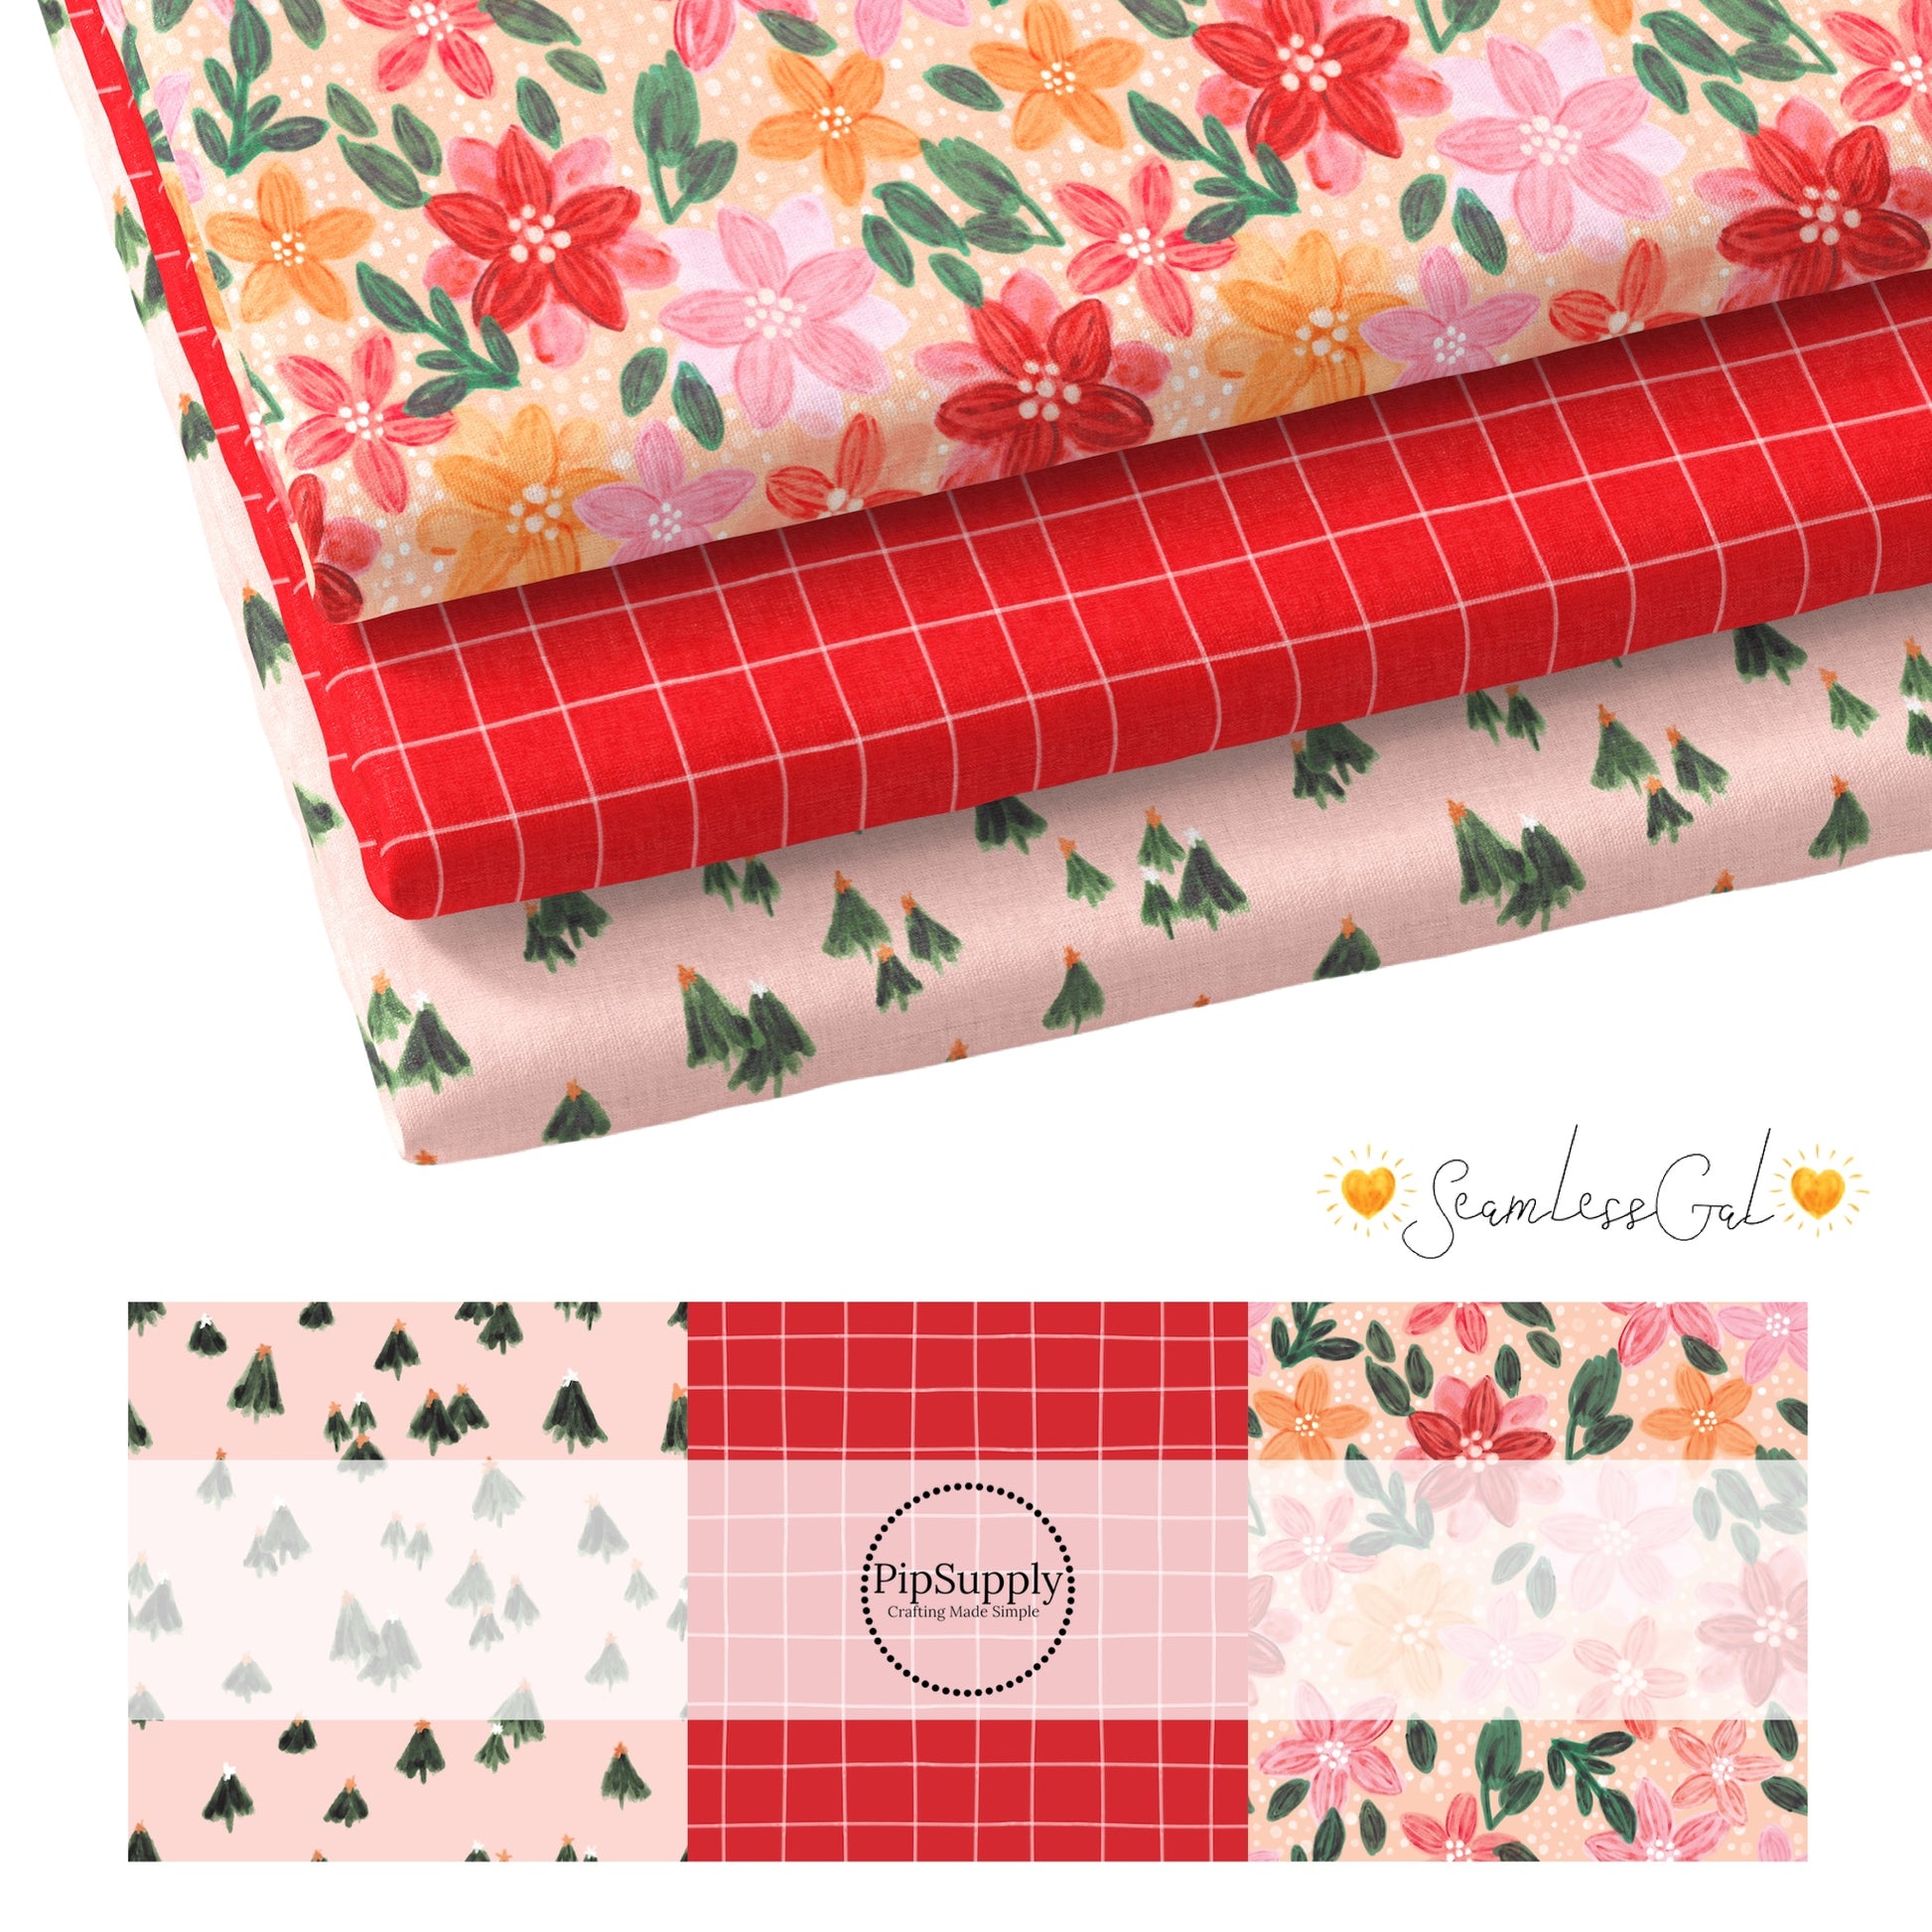 Three Fabric layers with different christmas designs including trees and red plaid